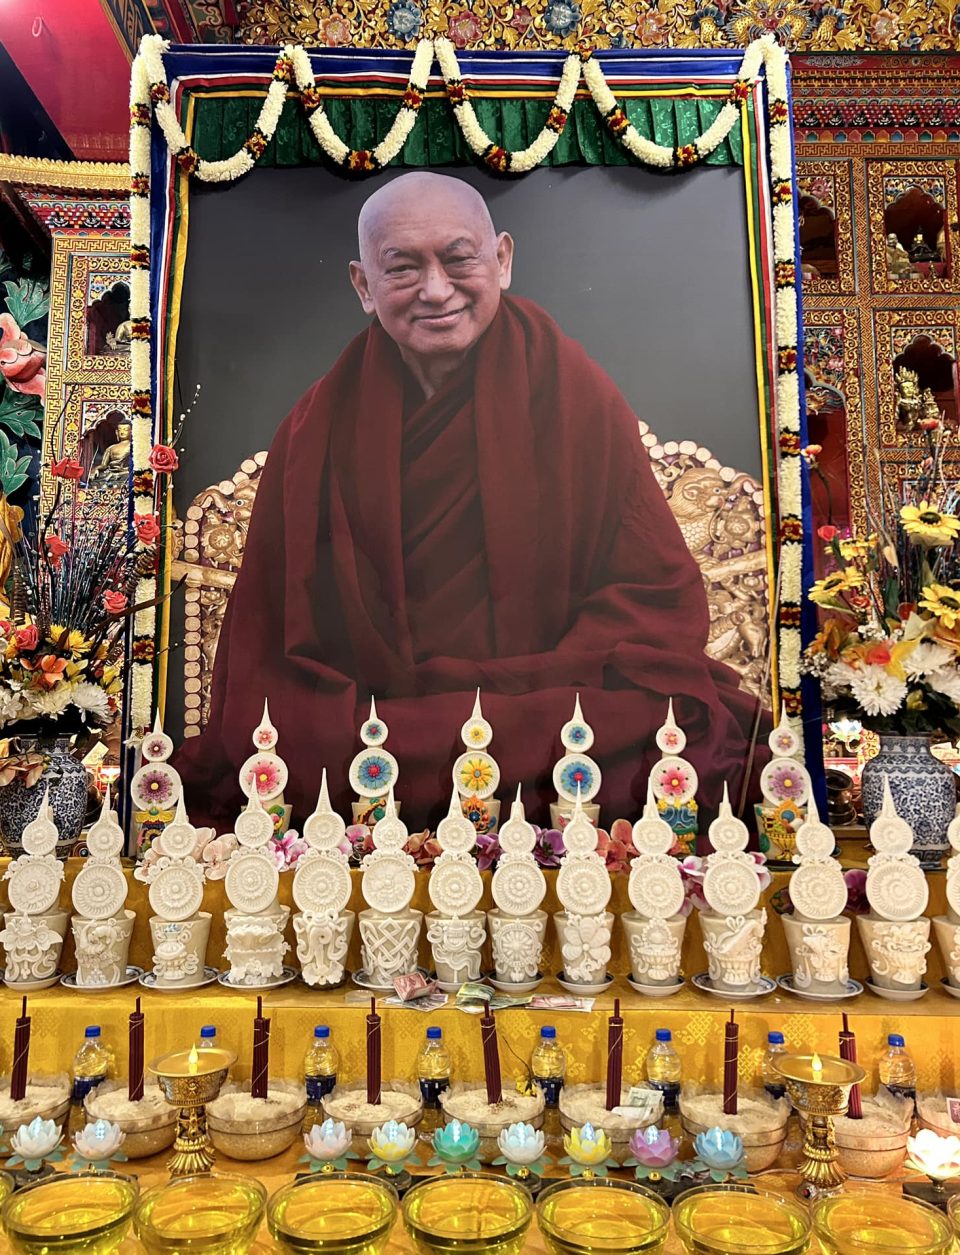 Commemoration of the Anniversary of Lama Zopa Rinpoche Passing Away Has Begun